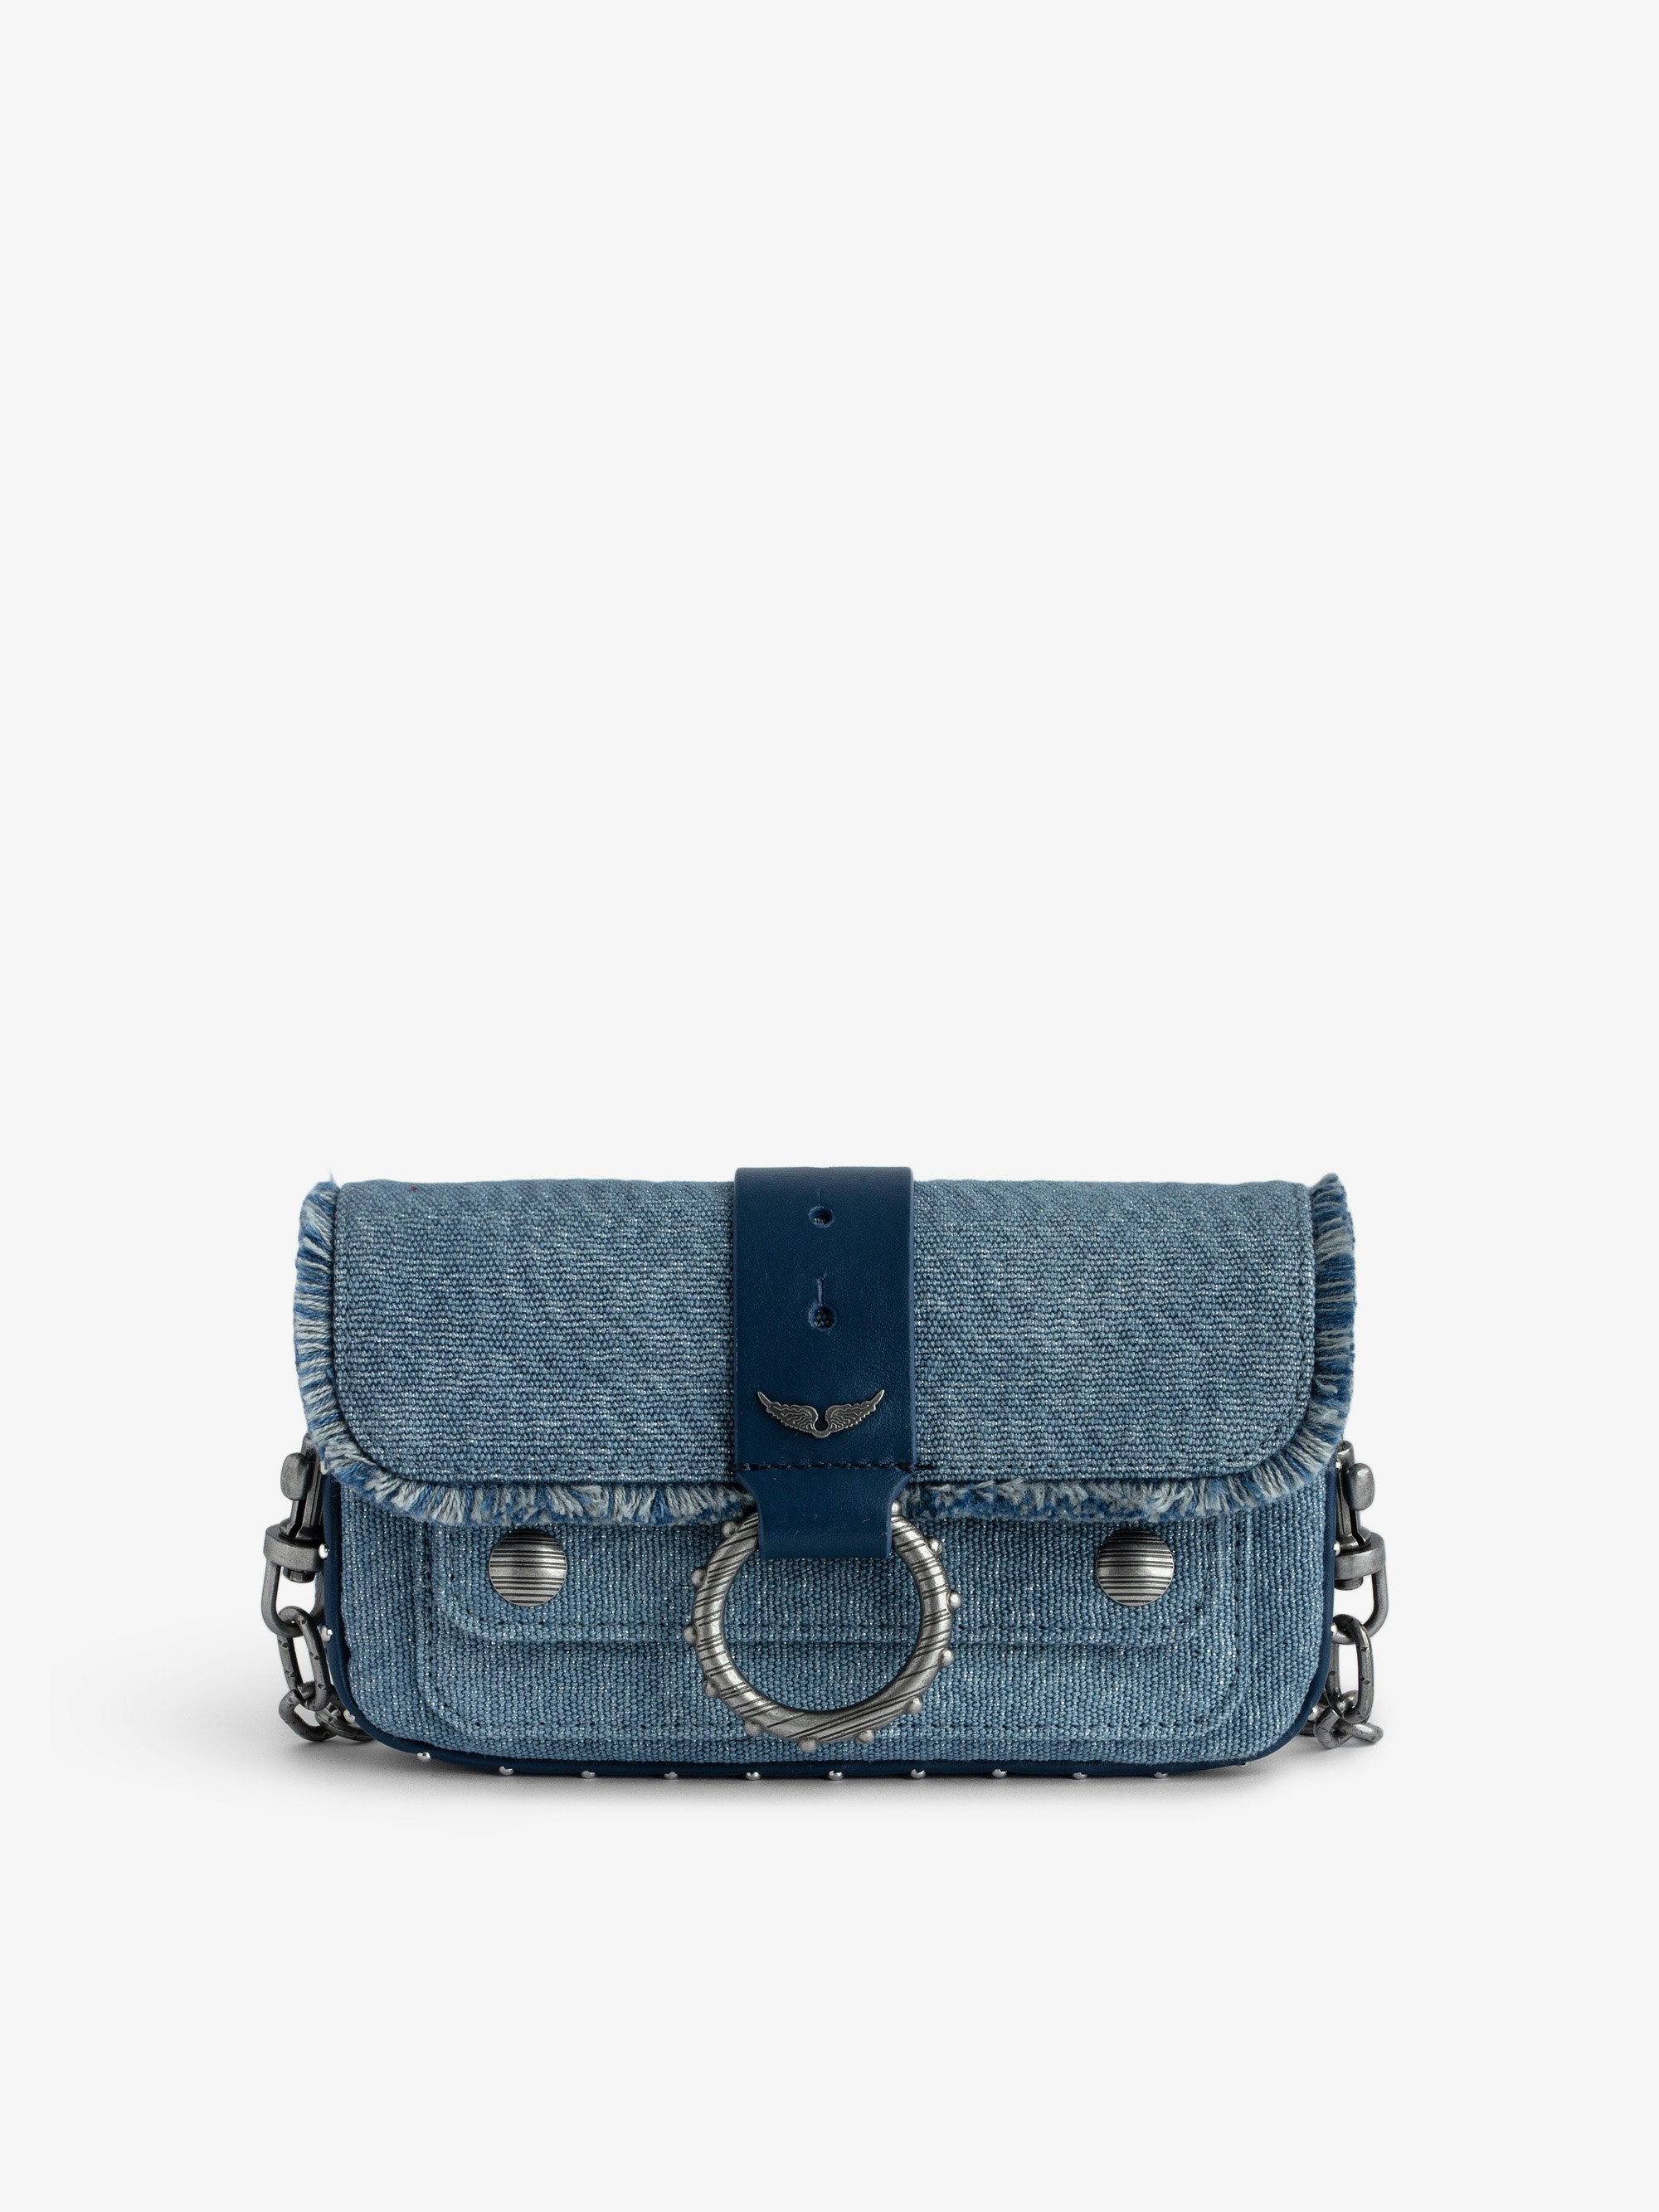 Kate Wallet Denim Bag - Designed by Kate Moss for Zadig&Voltaire.  Glitter denim mini bag with metal chain, leather loop and fringed trim.